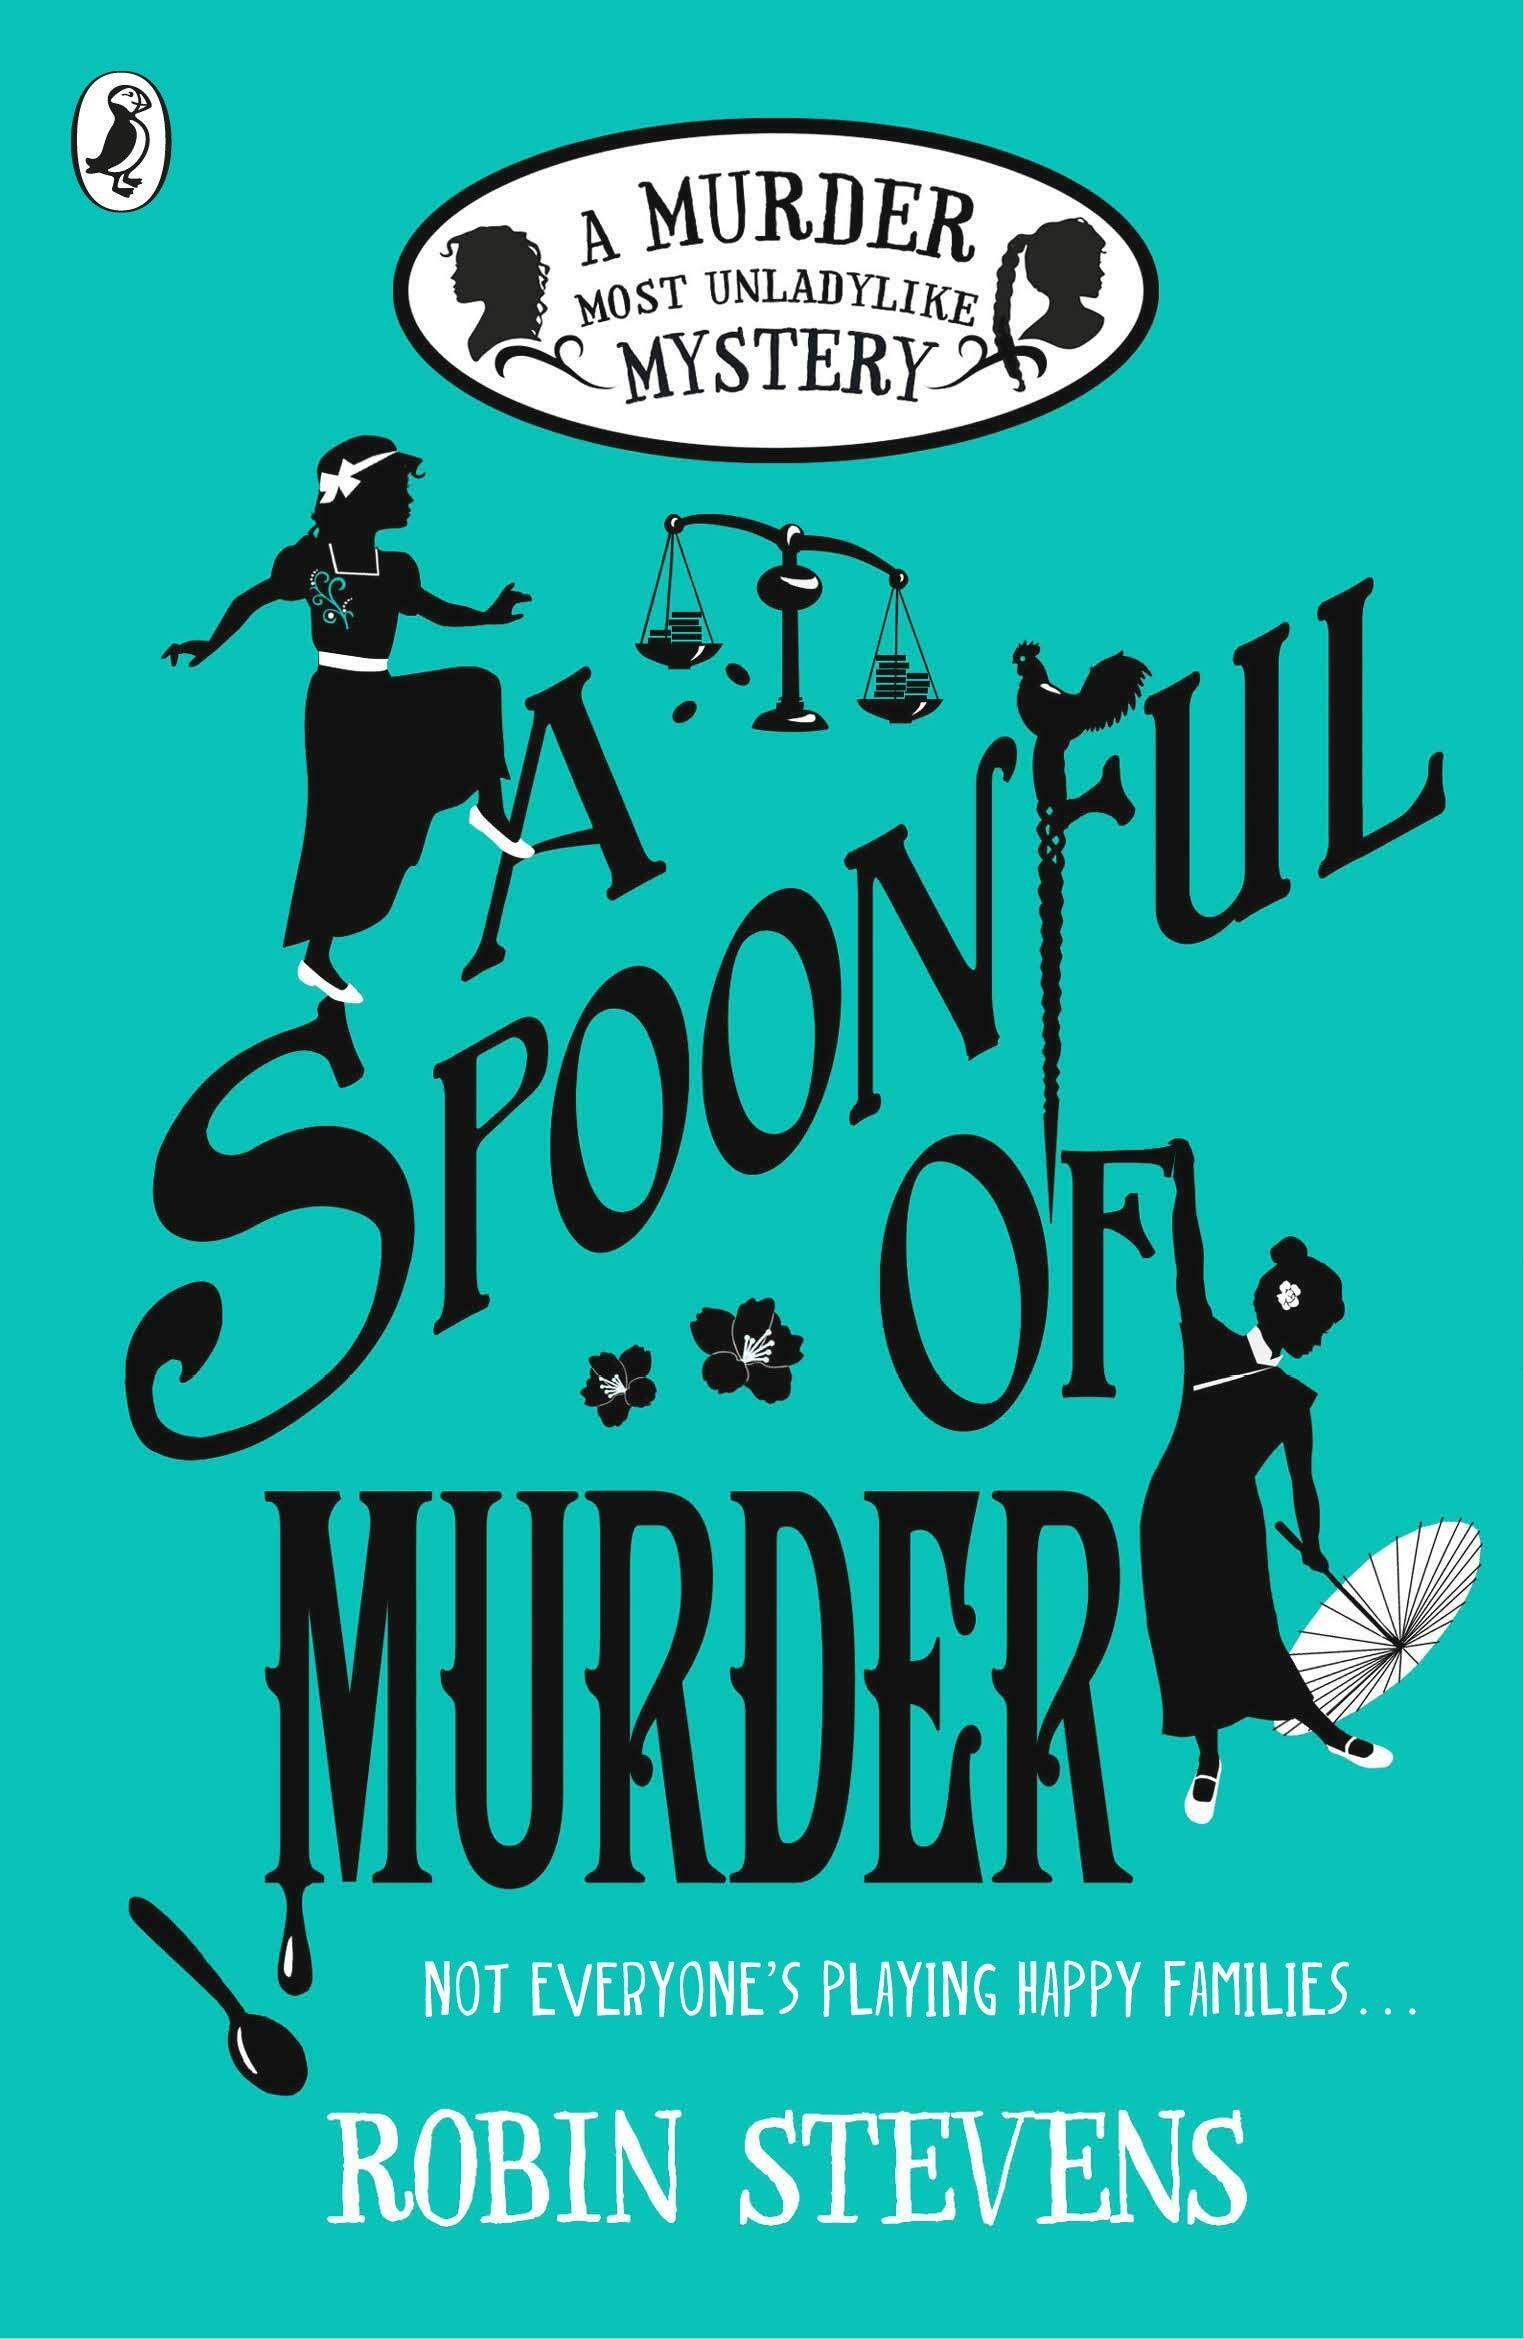 A Spoonful of Murder (Paperback)